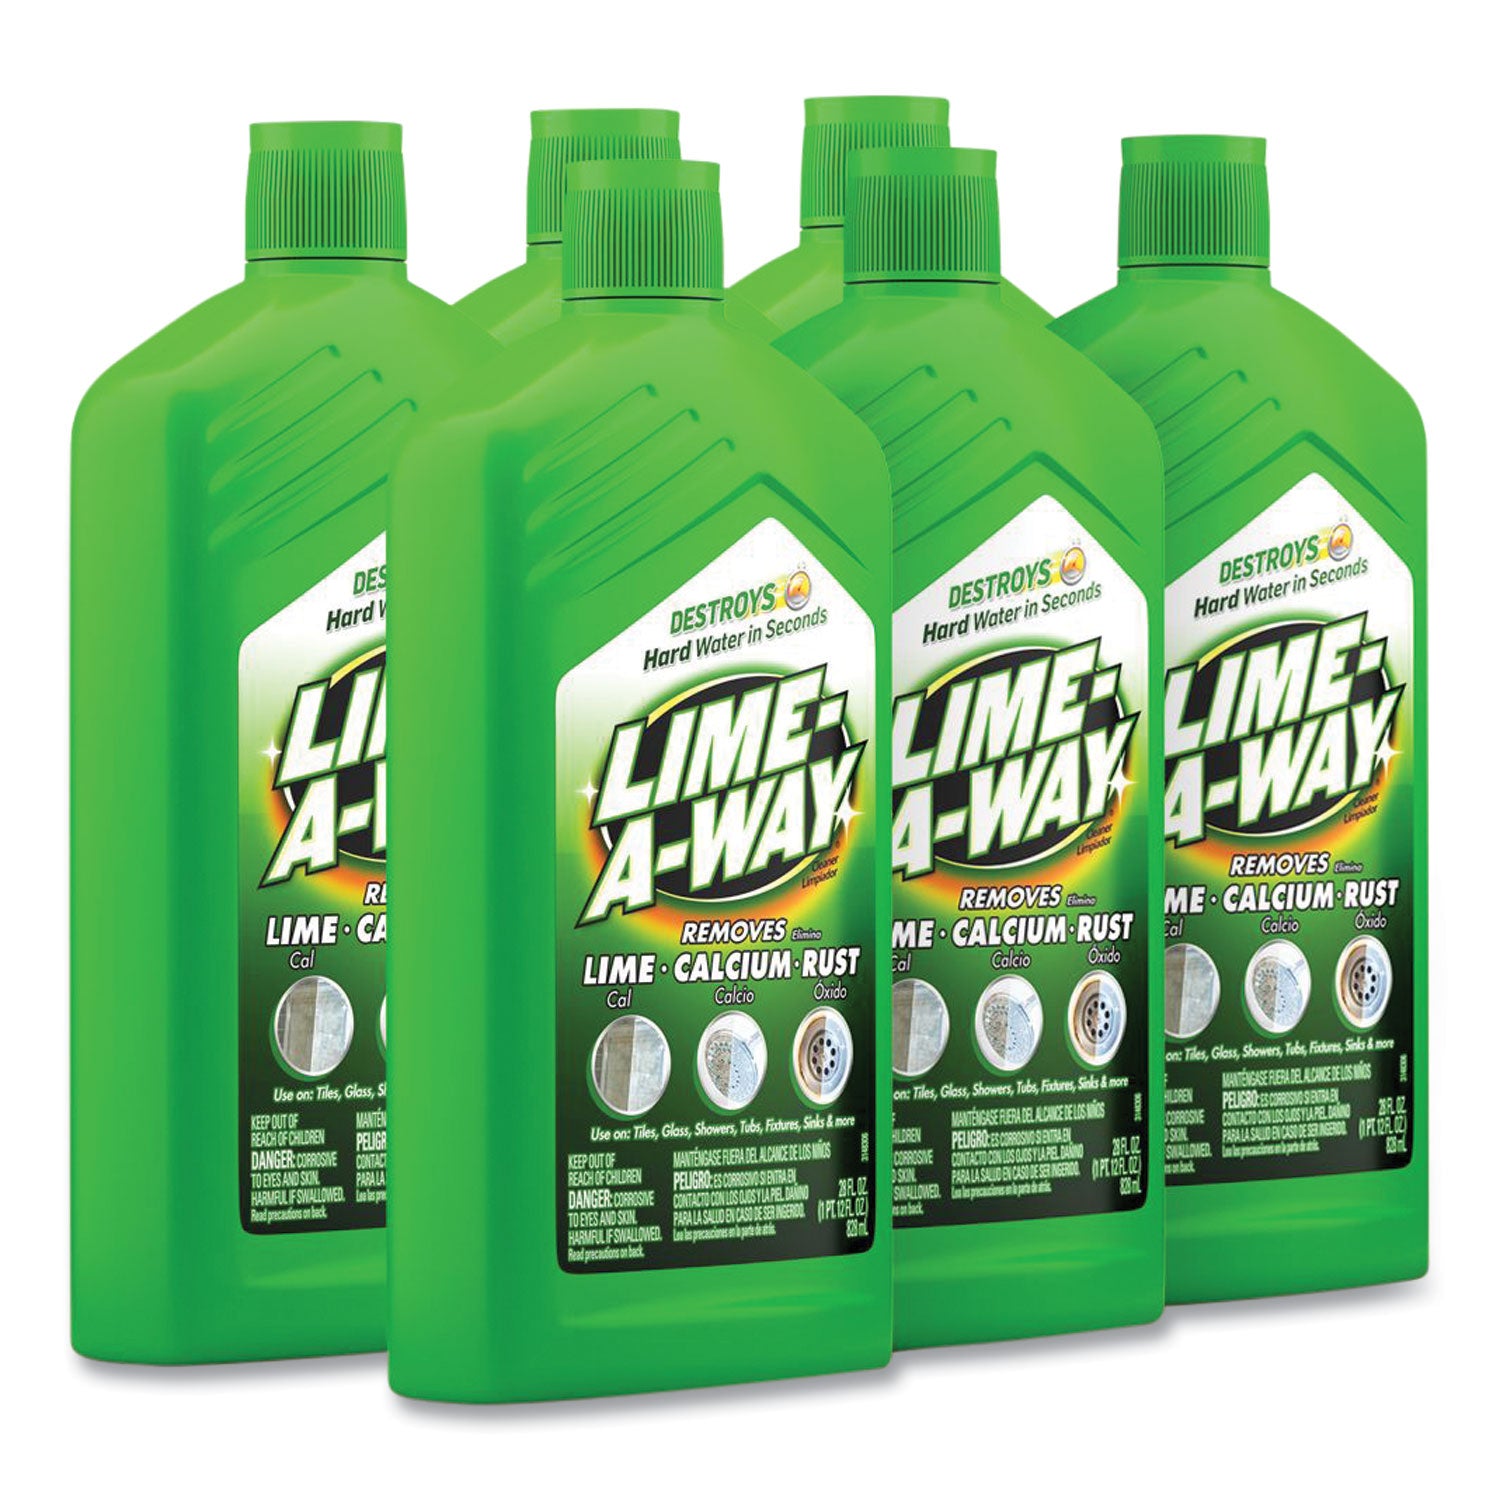 Lime, Calcium and Rust Remover, 28 oz Bottle, 6/Carton - 